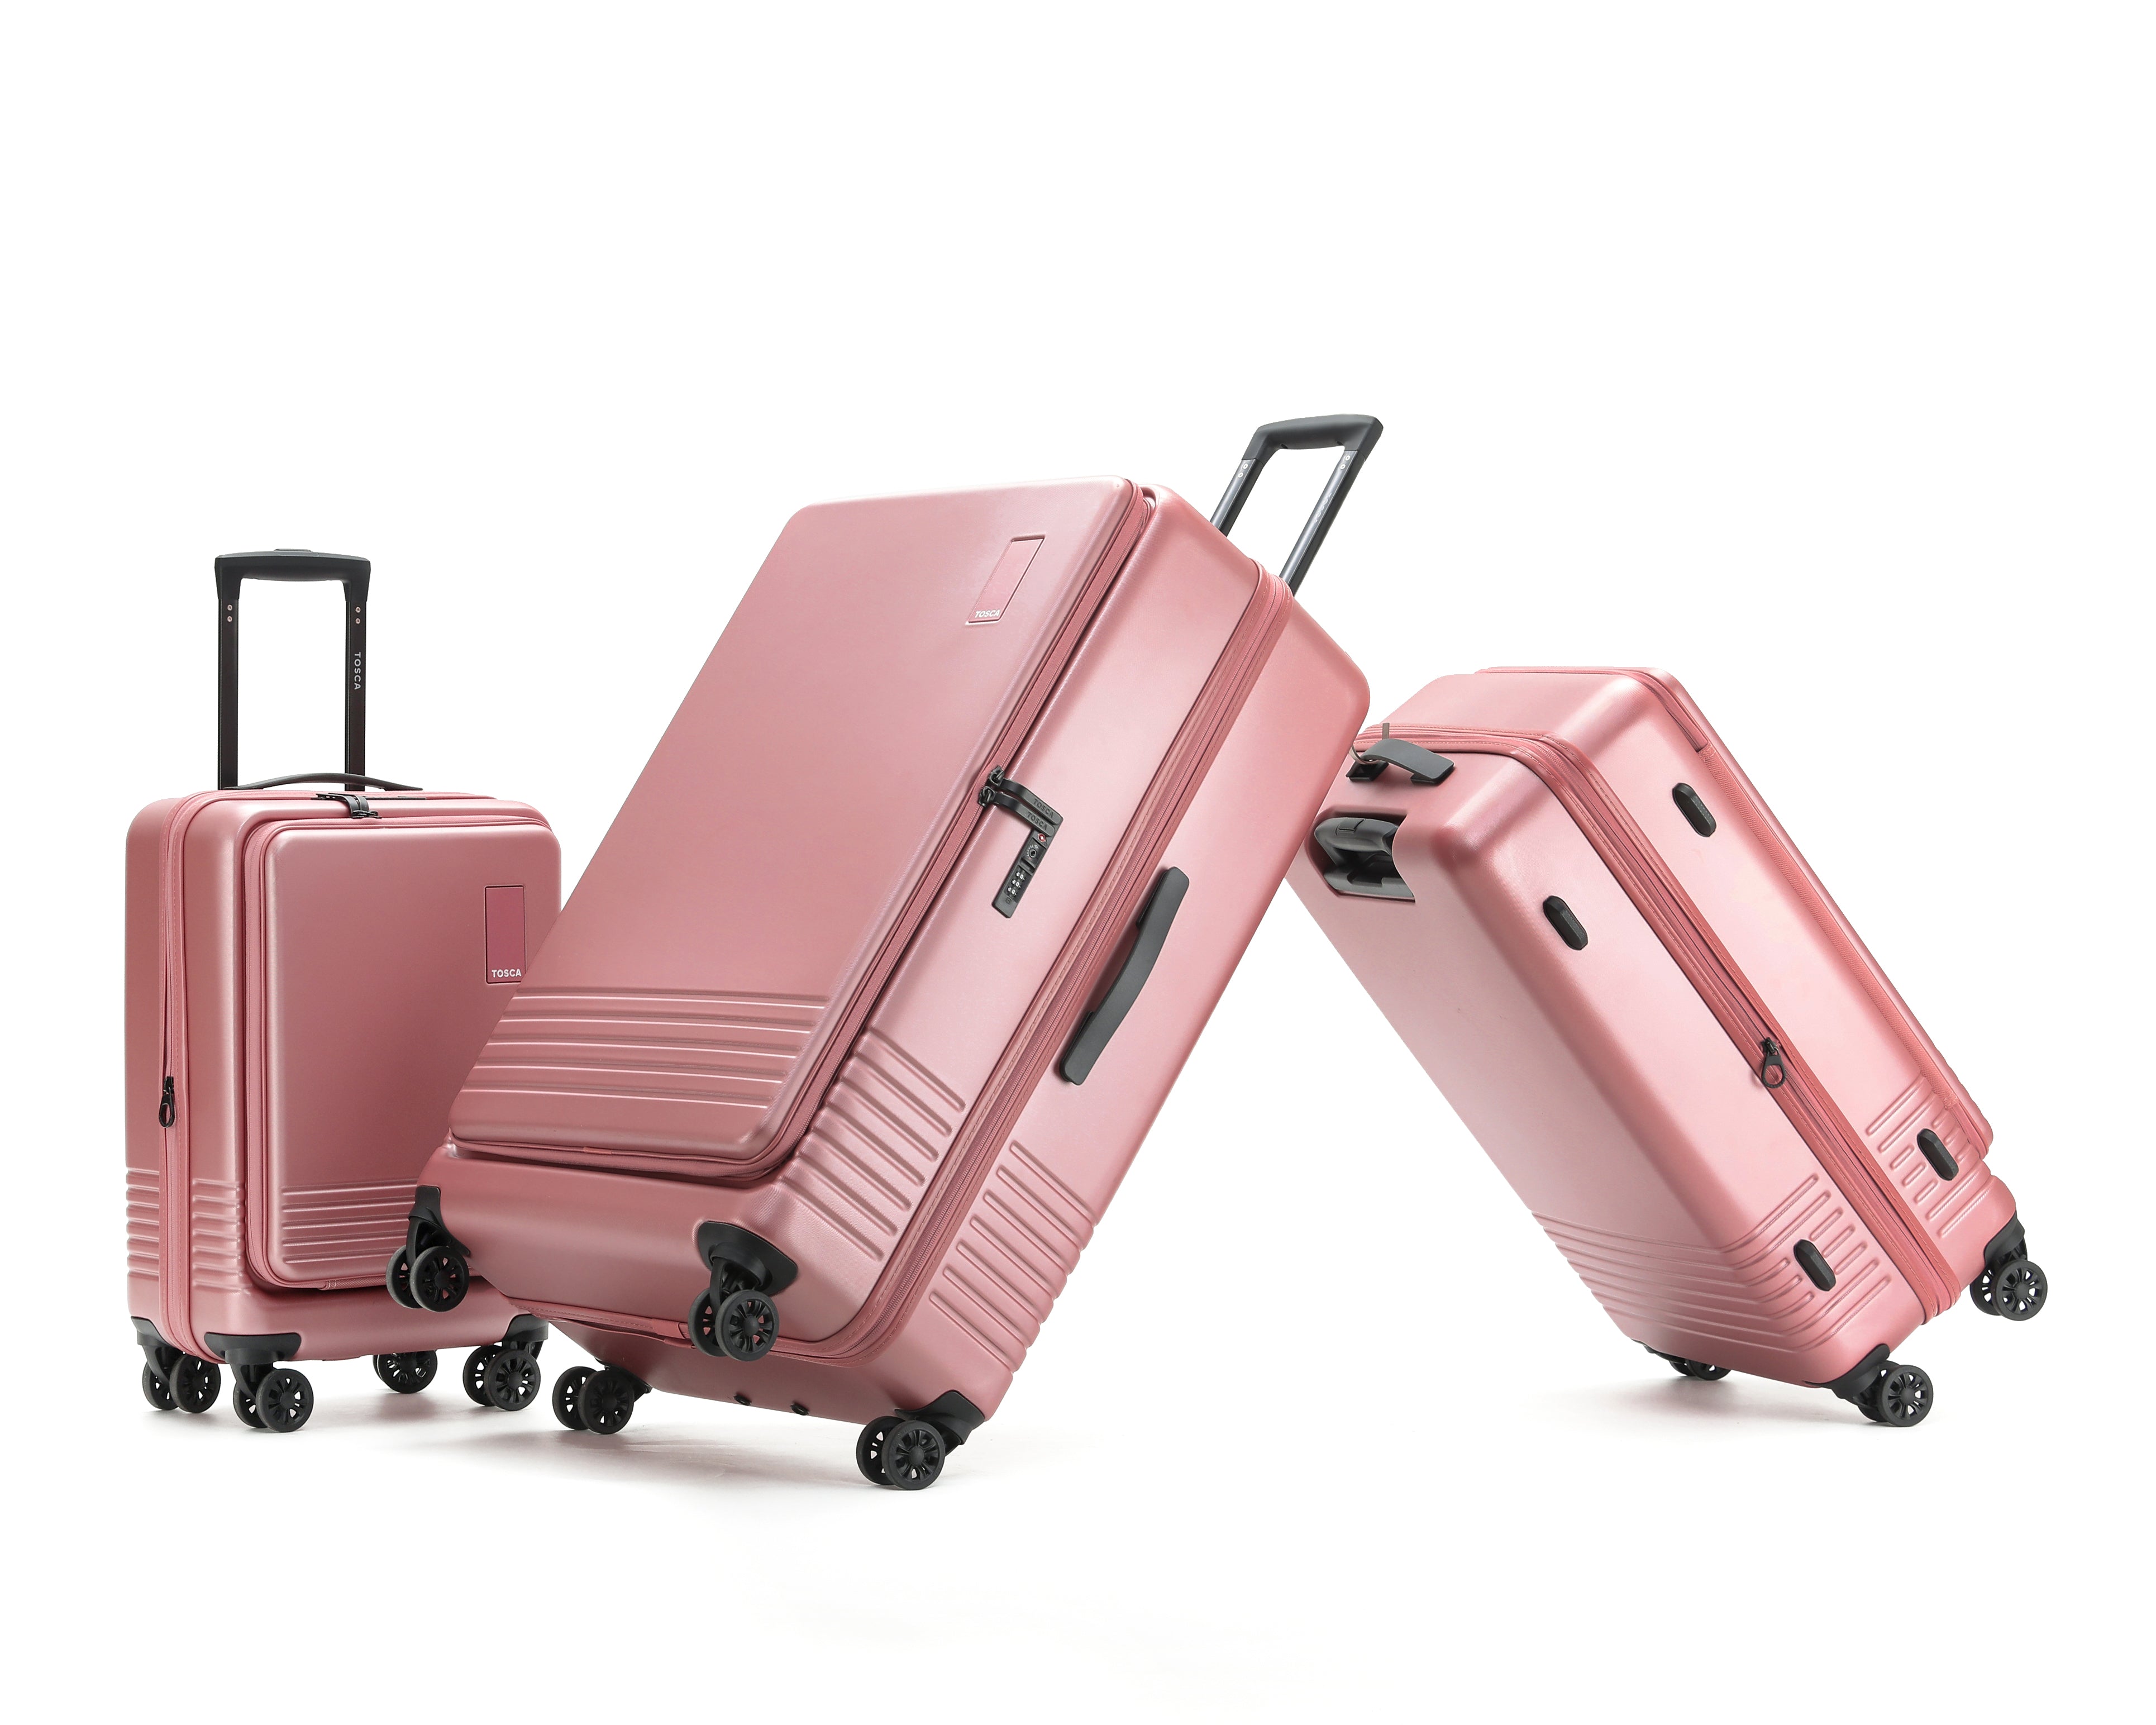 Tosca - TCA644 Horizon Front lid opening Set of 3 suitcases - Dusty Rose-3